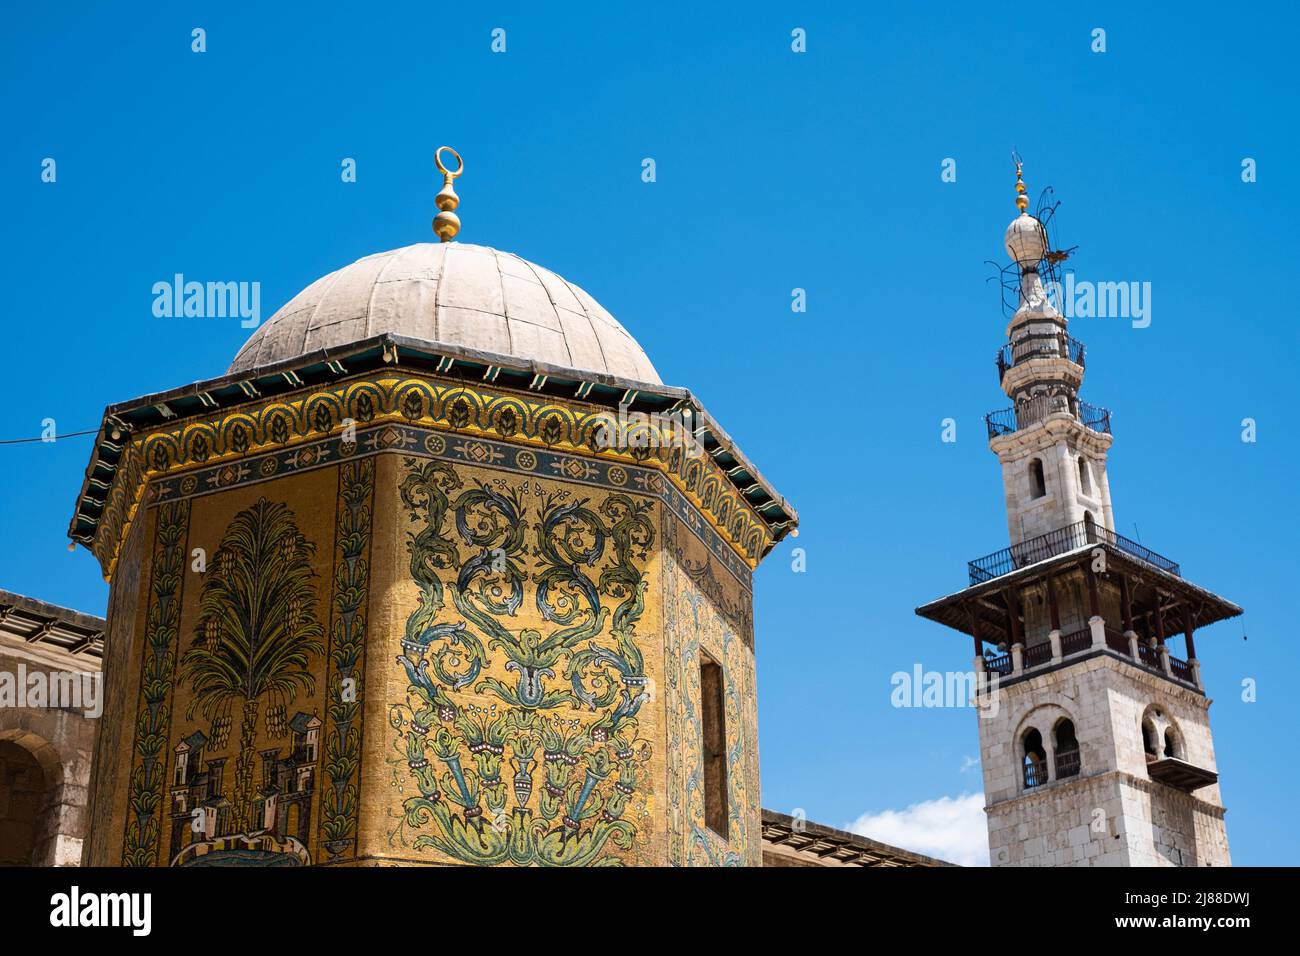 Damascus, Syria -May, 2022: The  Dome of the Treasury inside Umayyad Mosque, a.k.a. the Great Mosque of Damascus Stock Photo